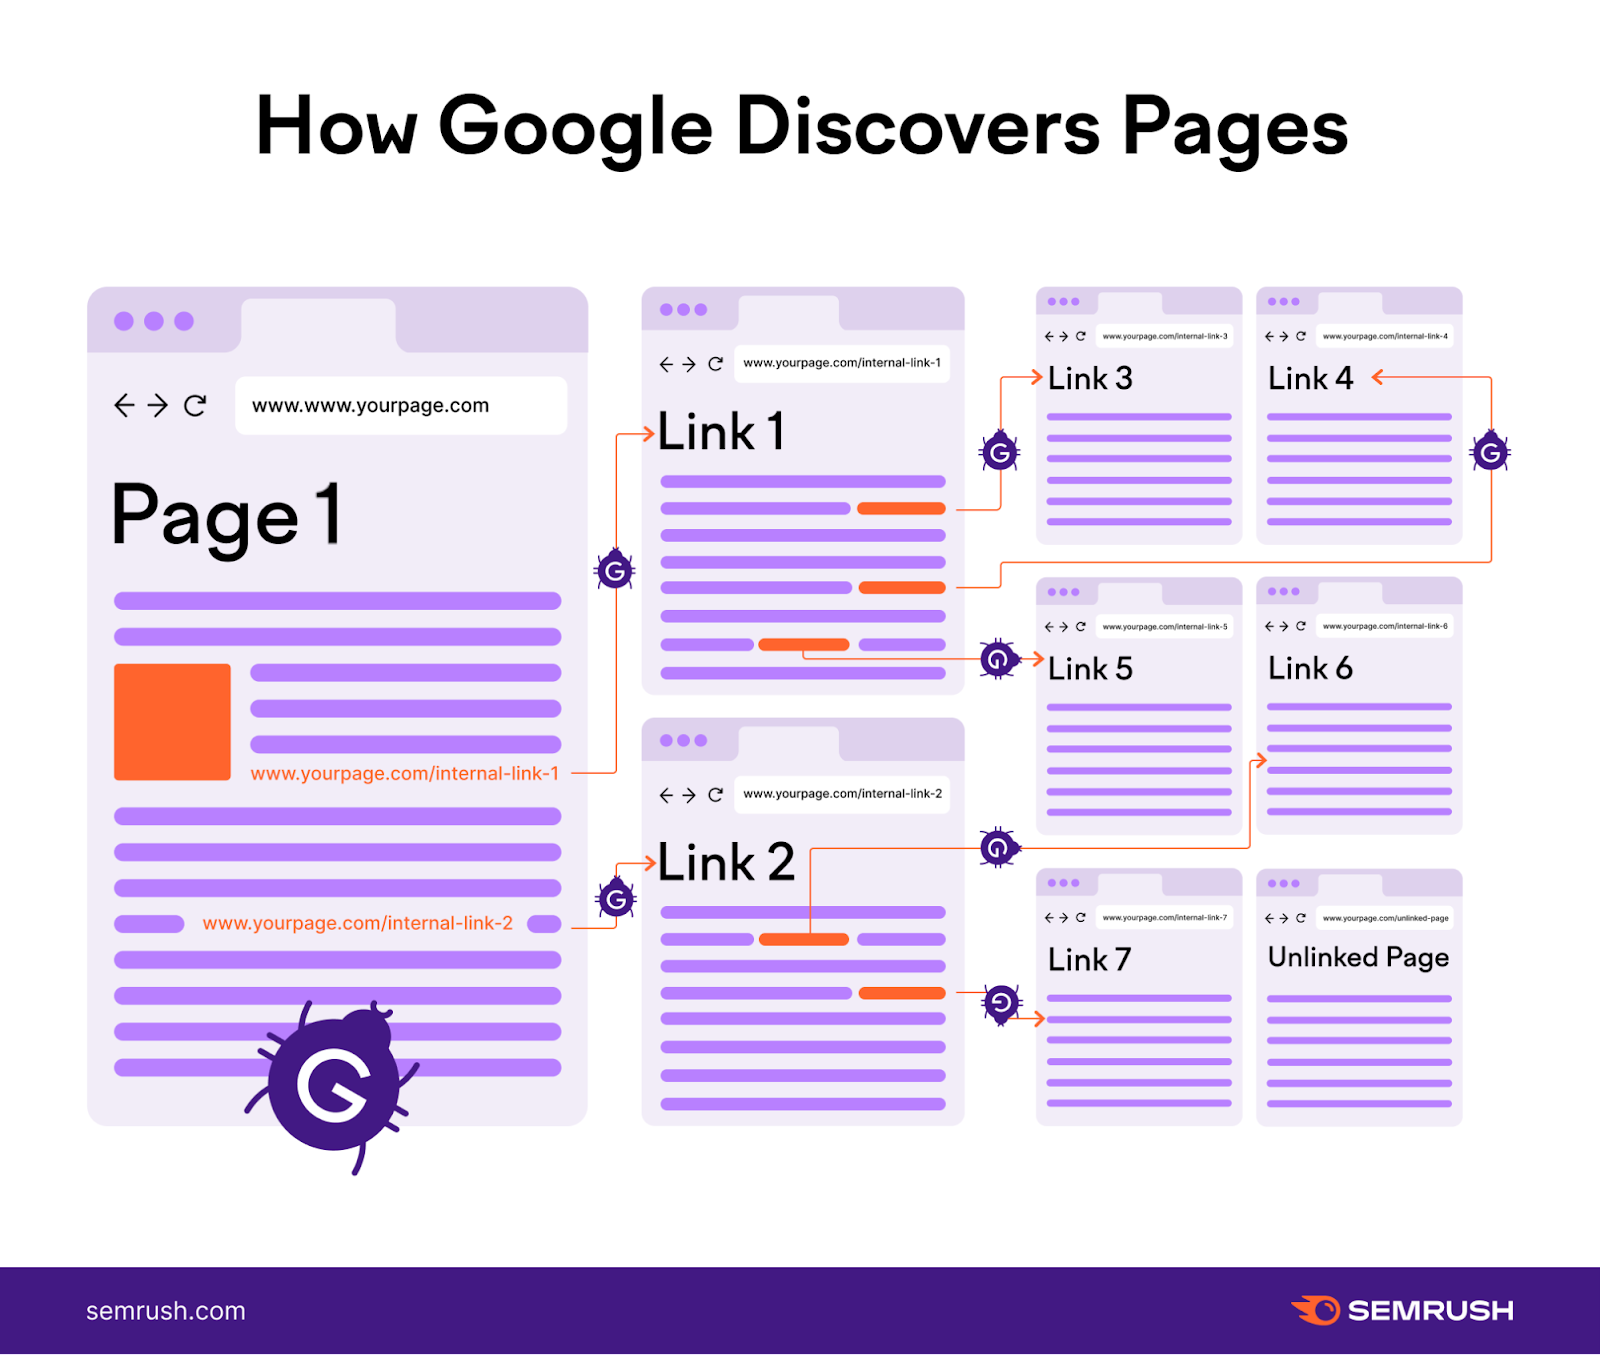 A visual explanation of how Google discovers pages